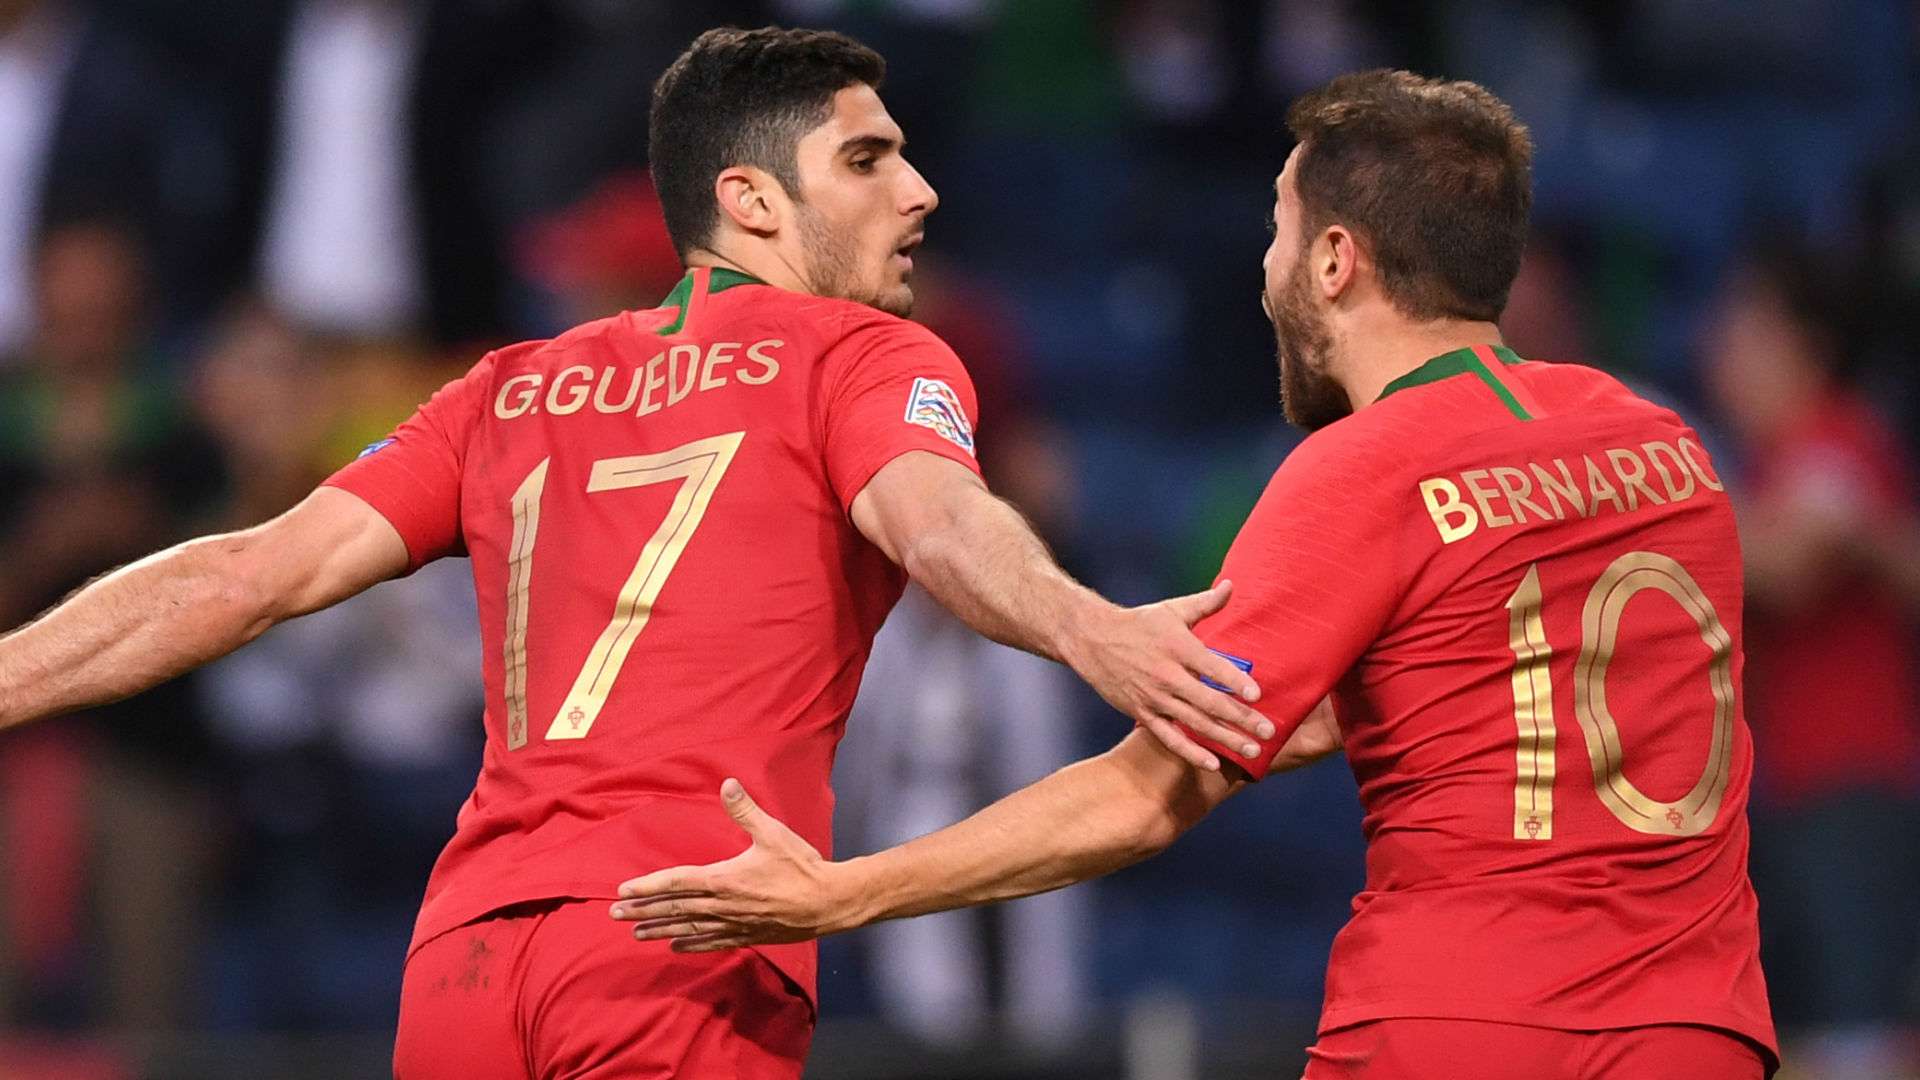 Guedes Portugal Nations league